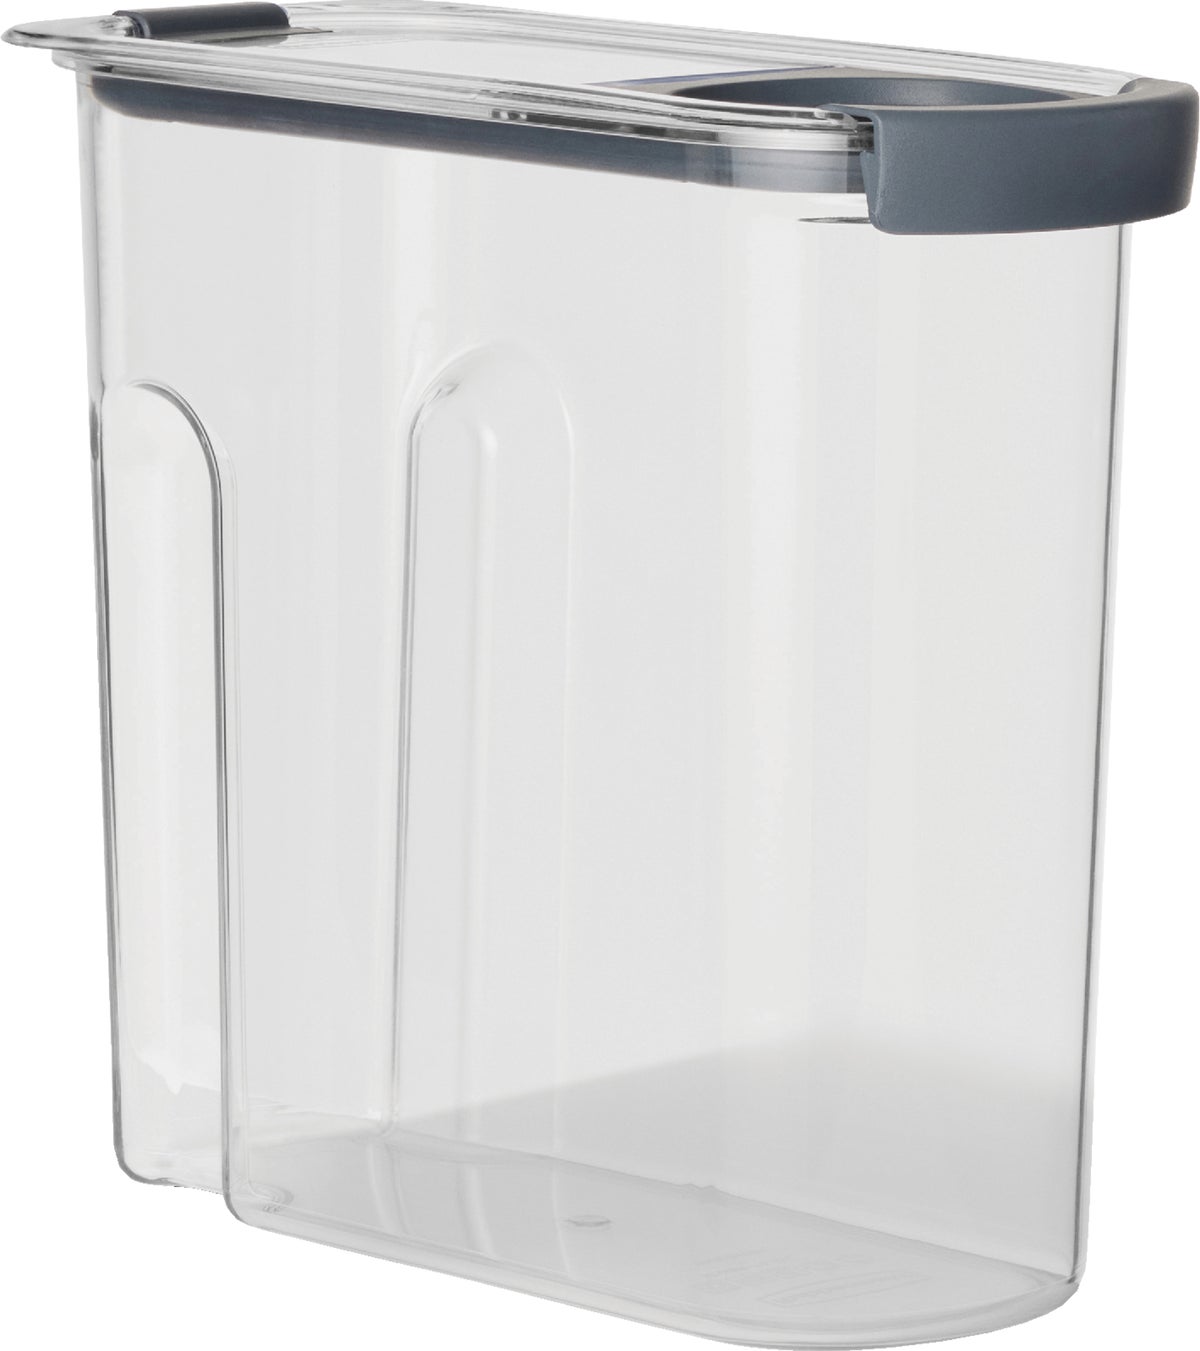 Rubbermaid Stain Shield 14 Cup Food Storage Container 1937693 for